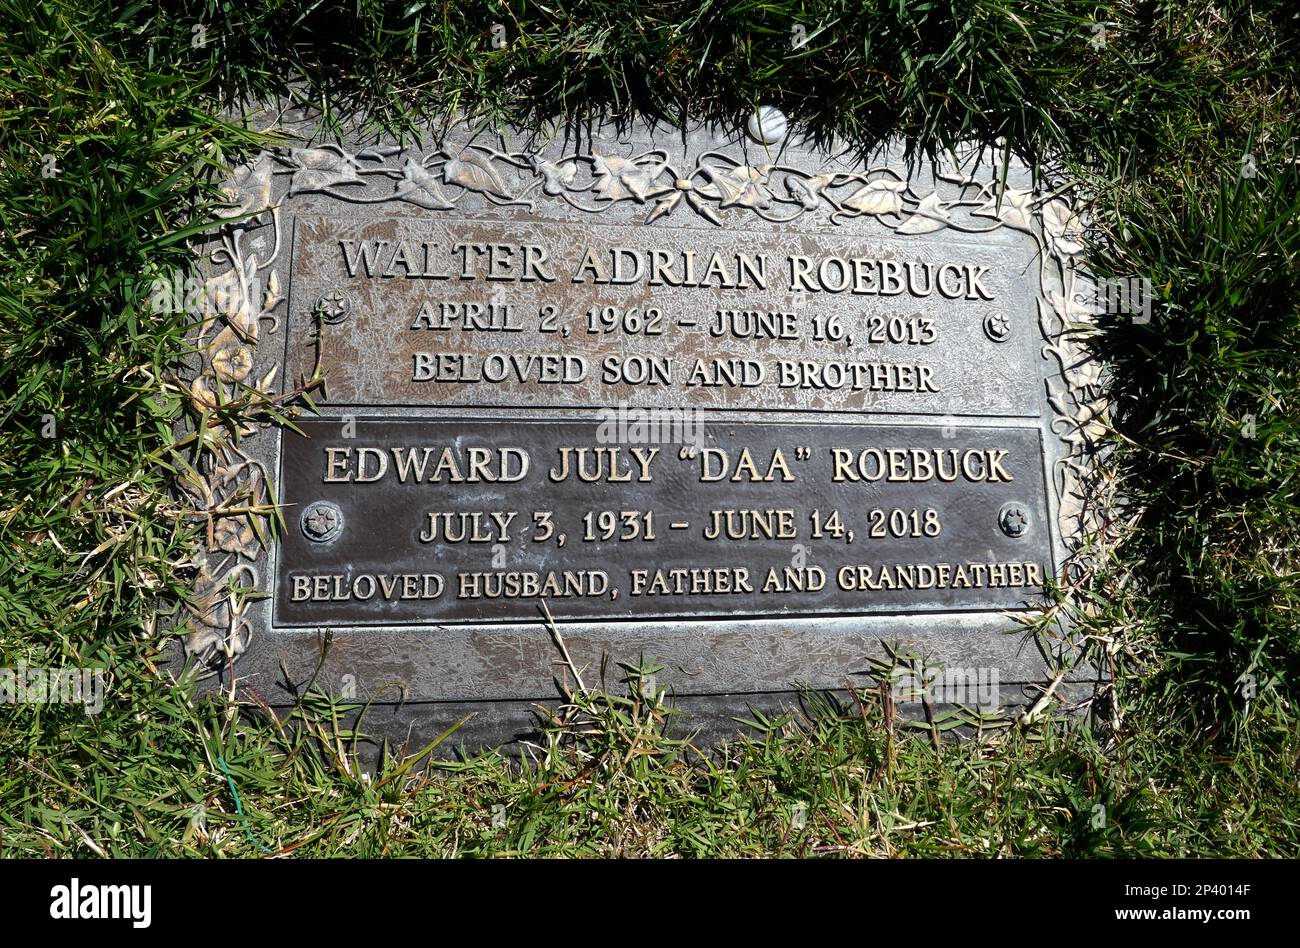 Long Beach, California, USA 2nd March 2023 Major League Baseball Player Ed Roebuck's Grave in Bouvardia section at Forest Lawn Long Beach Memorial Park Cemetery on March 2, 2023 in Long Beach, California, USA. Photo by Barry King/Alamy Stock Photo Stock Photo